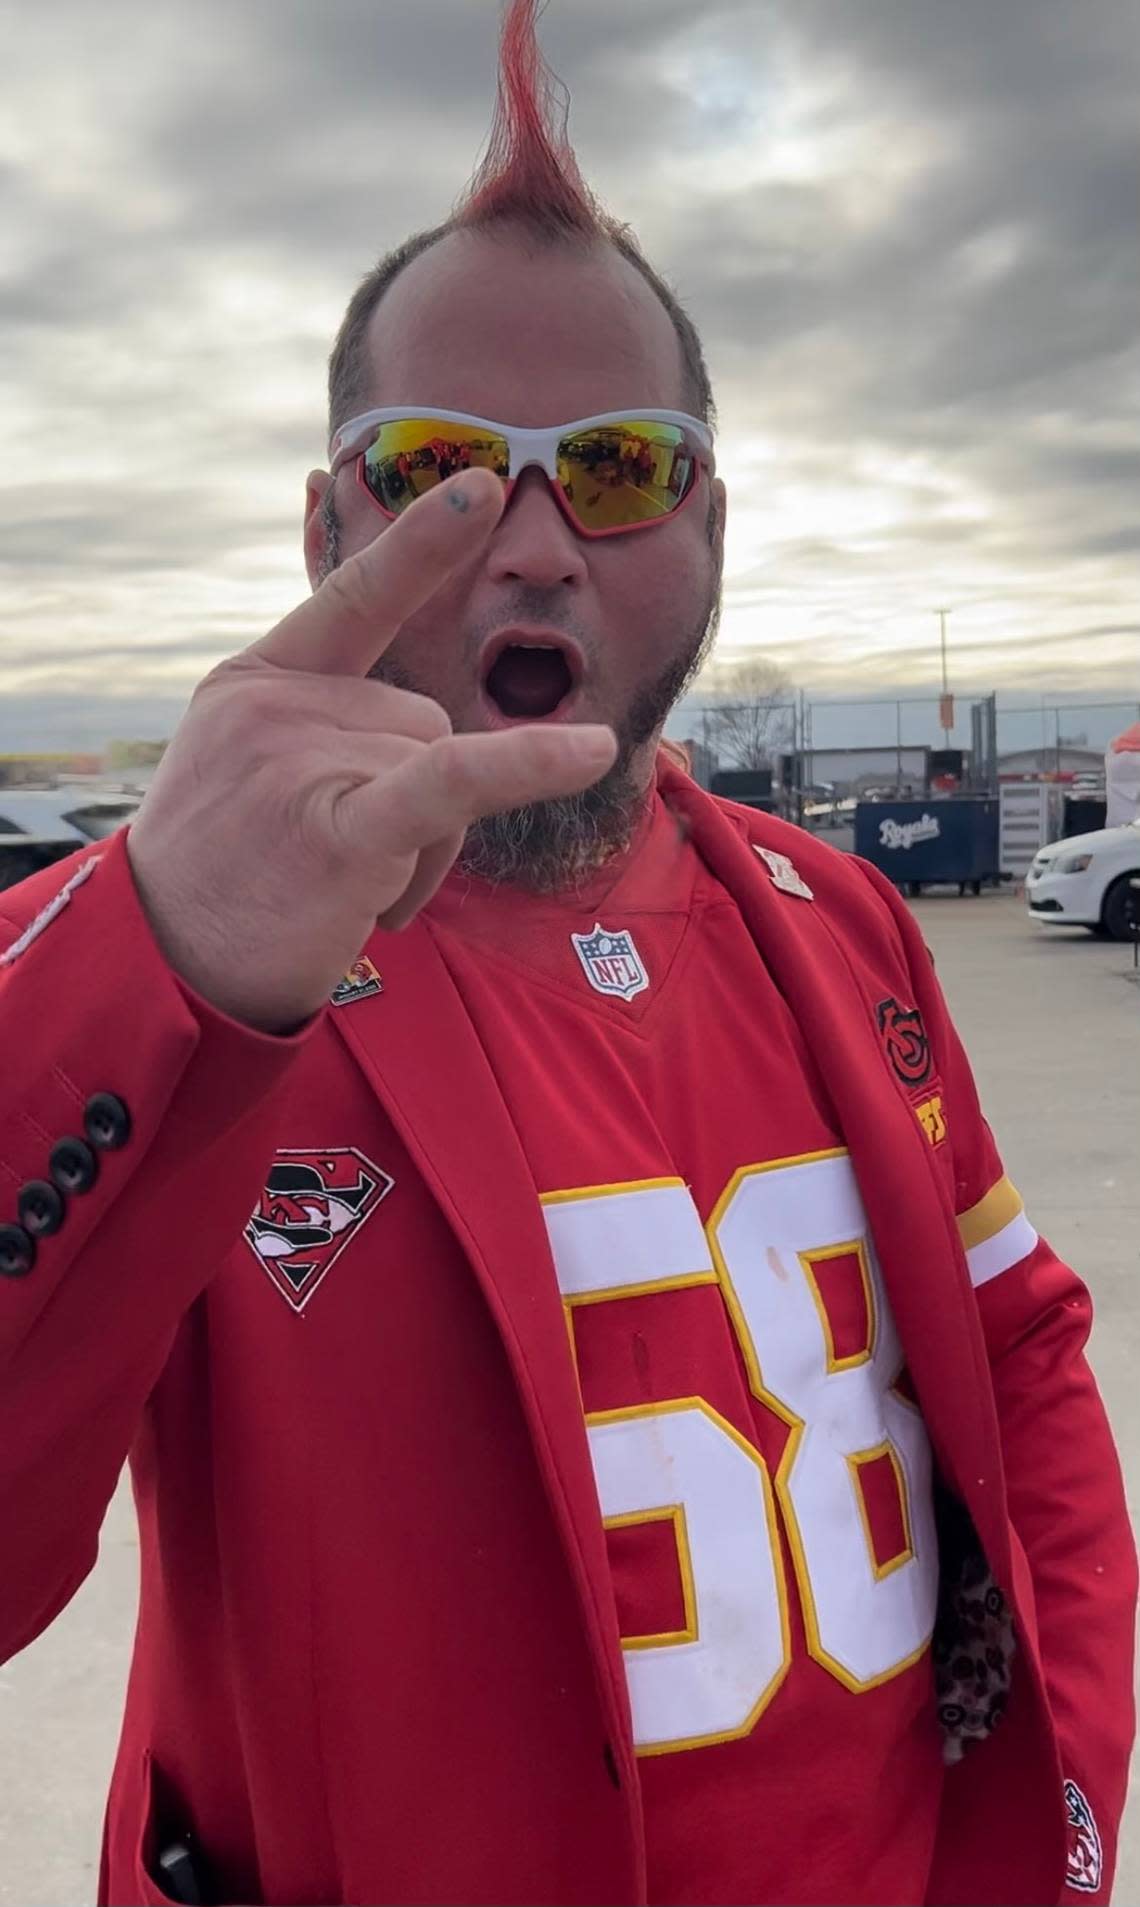 Chris Blanz had his mohawk colored Chiefs red for the game Sunday. He felt sure it would turn out in the Chiefs’ favor. “This is Arrowhead,” he said. “We have Patrick Mahomes.”